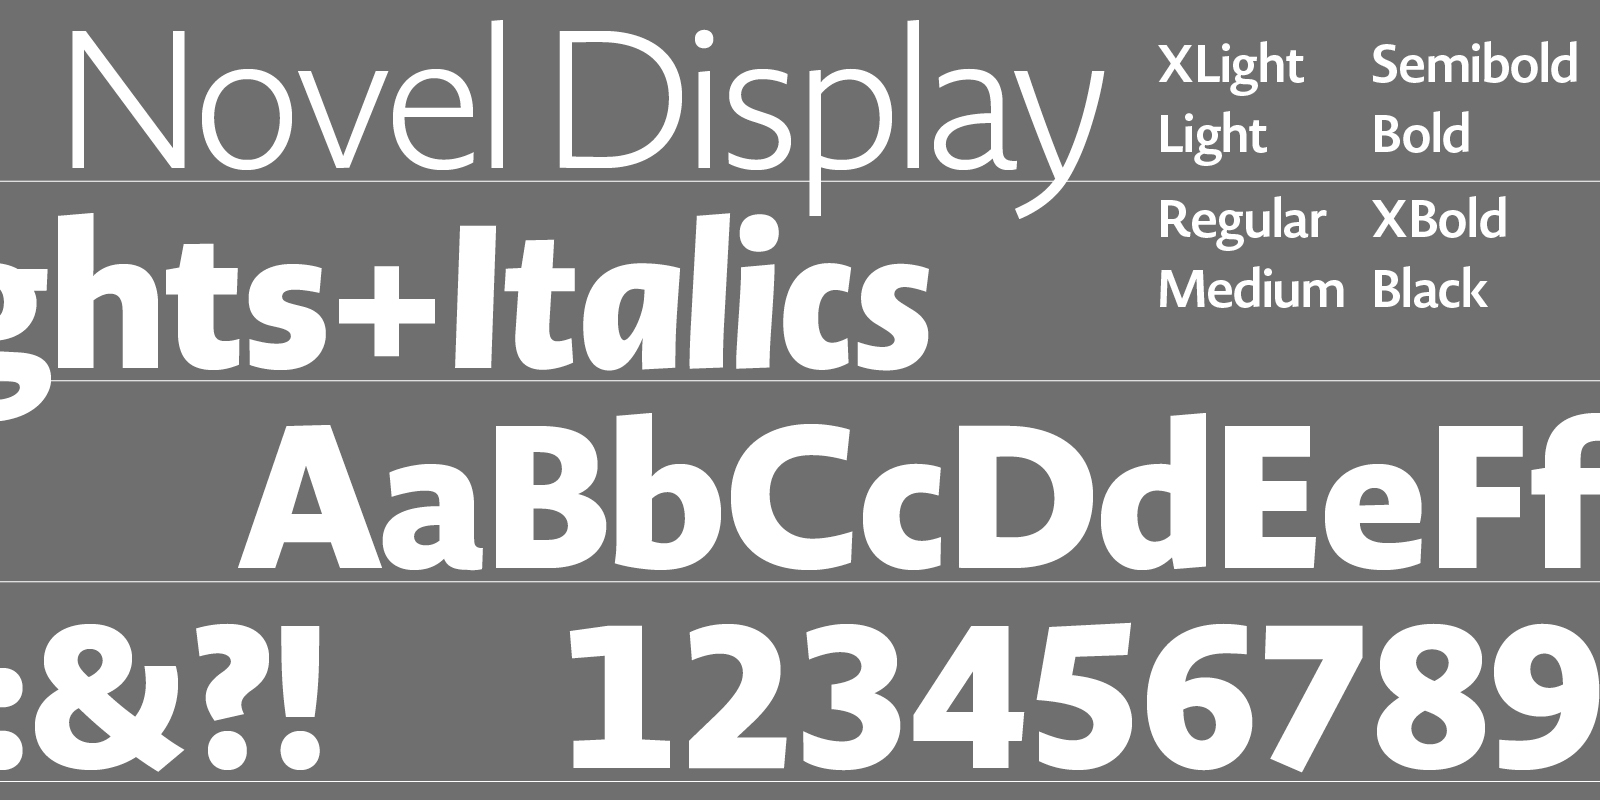 Card displaying Novel Display typeface in various styles